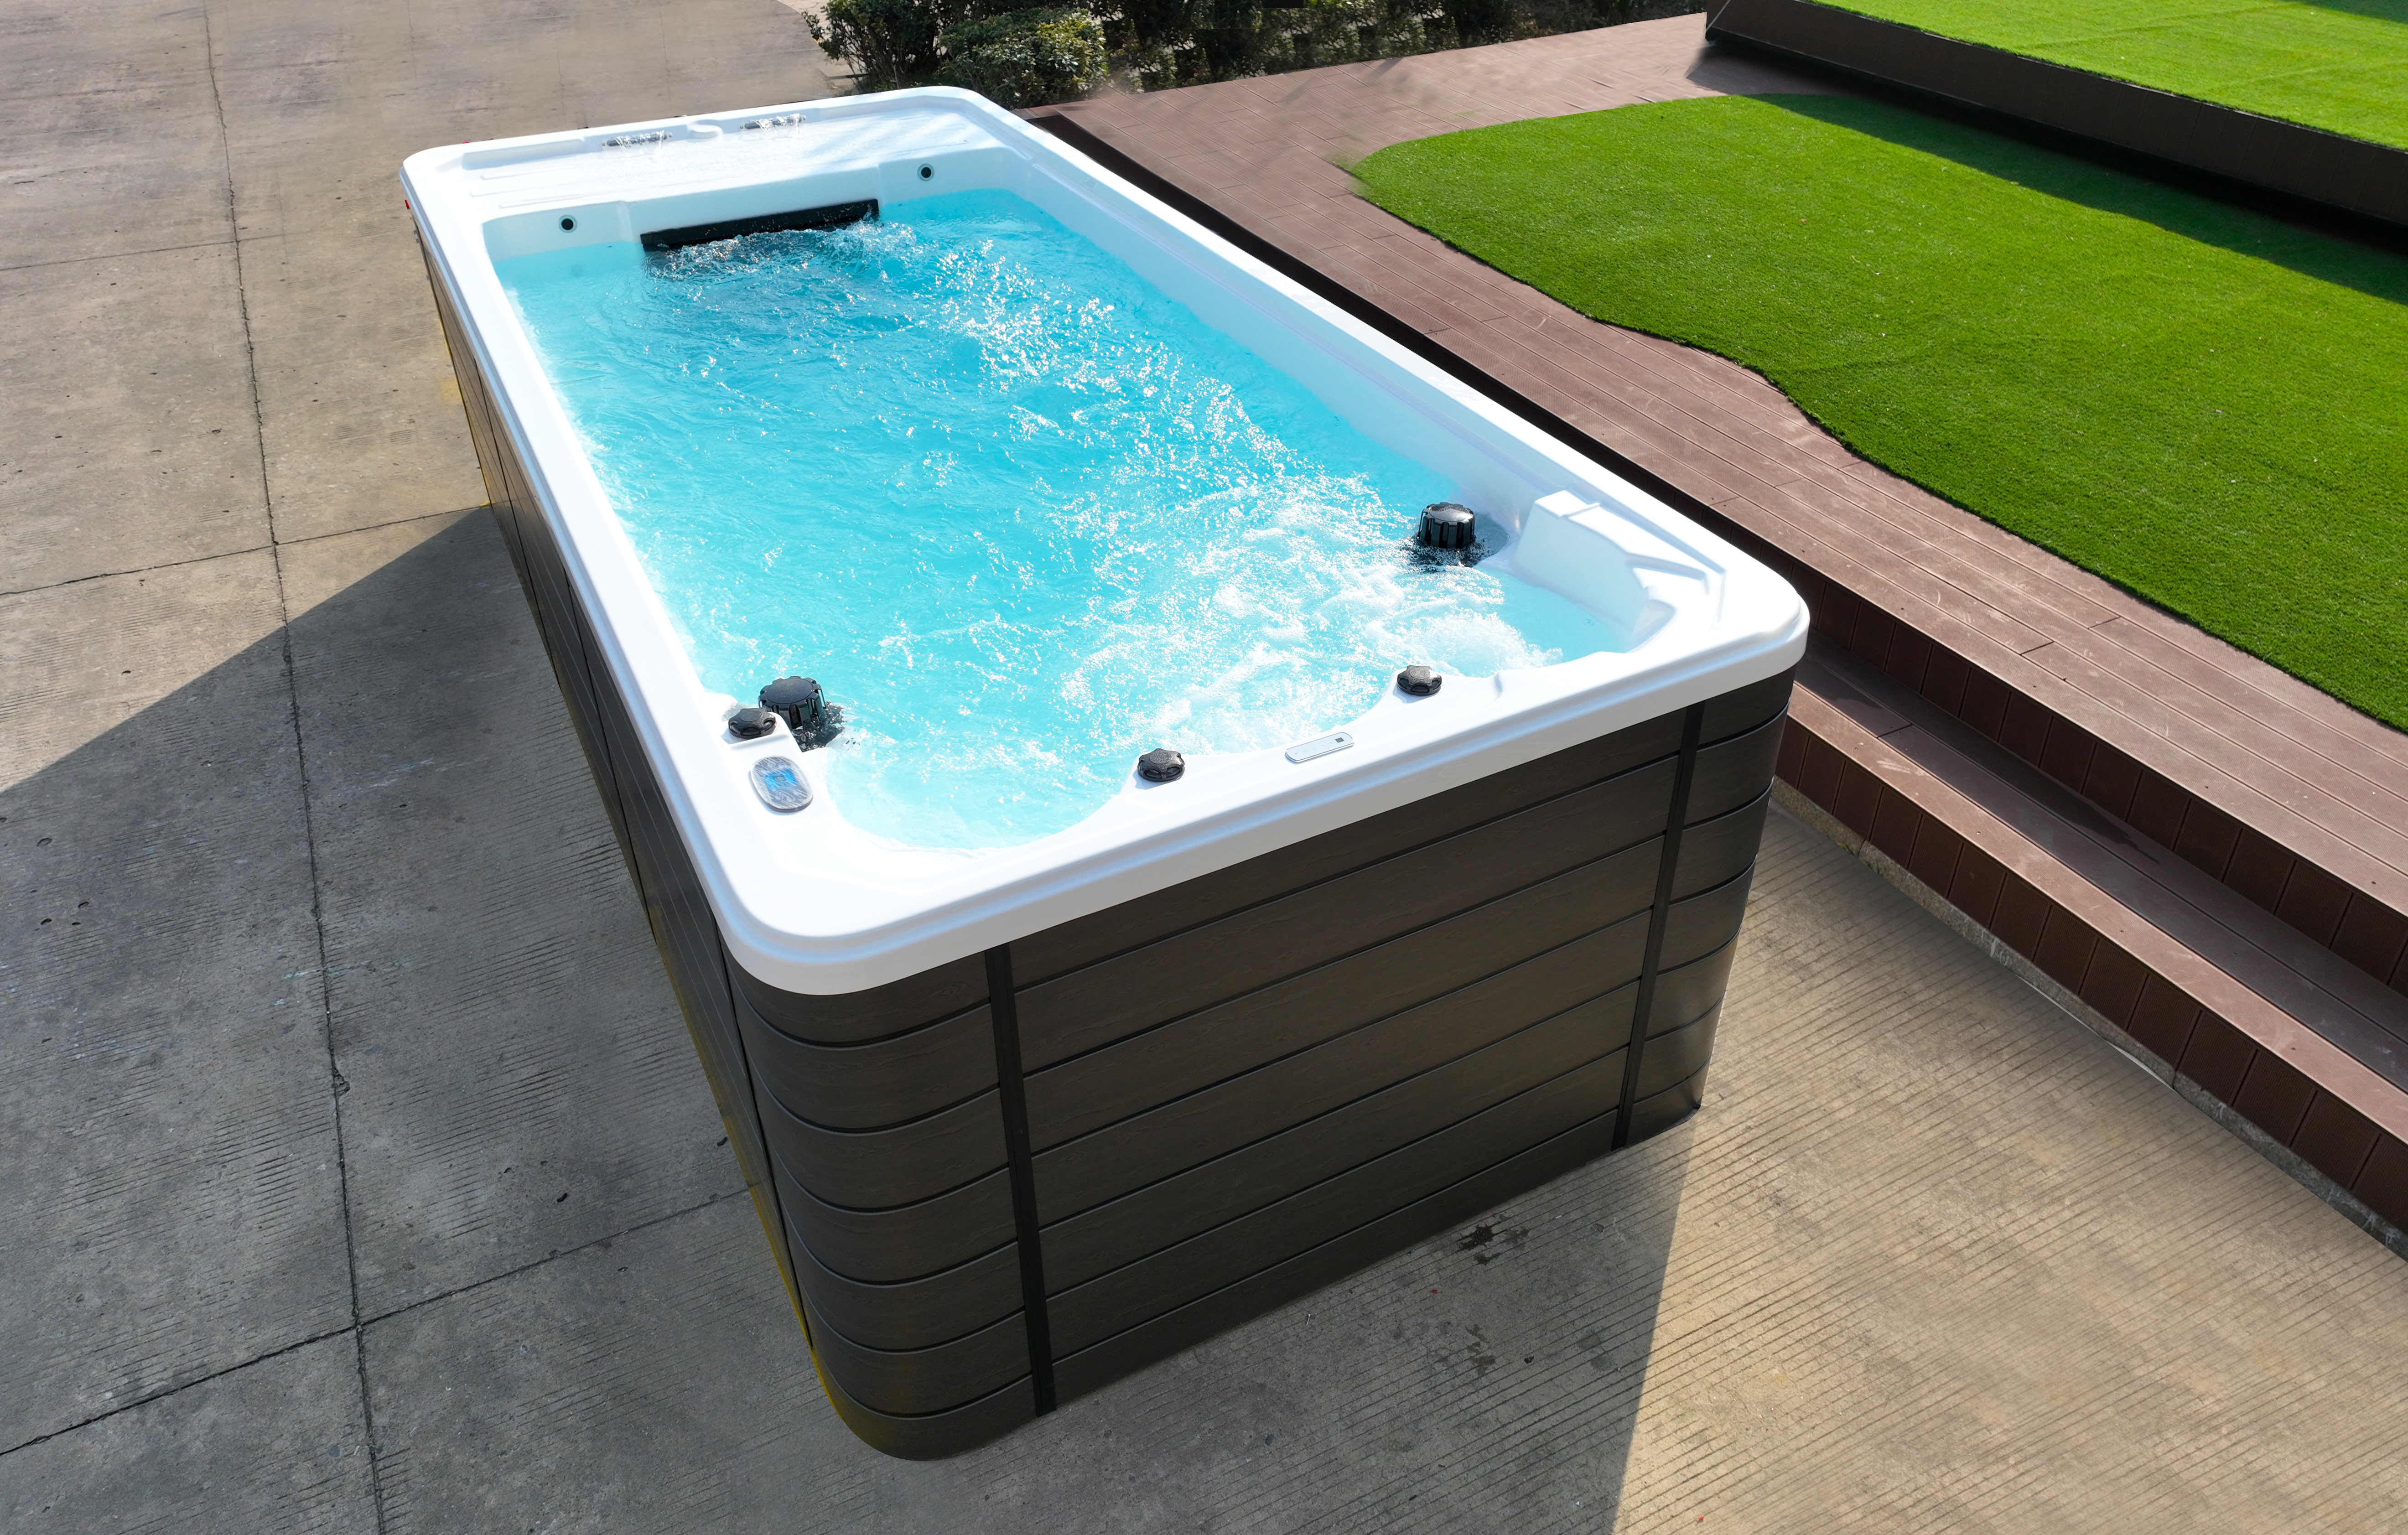 BG-6605 Cheap High Quality 3 Persons Outdoor Acrylic Whirlpools Spa Hot Tub With Bluetooth Speaker 